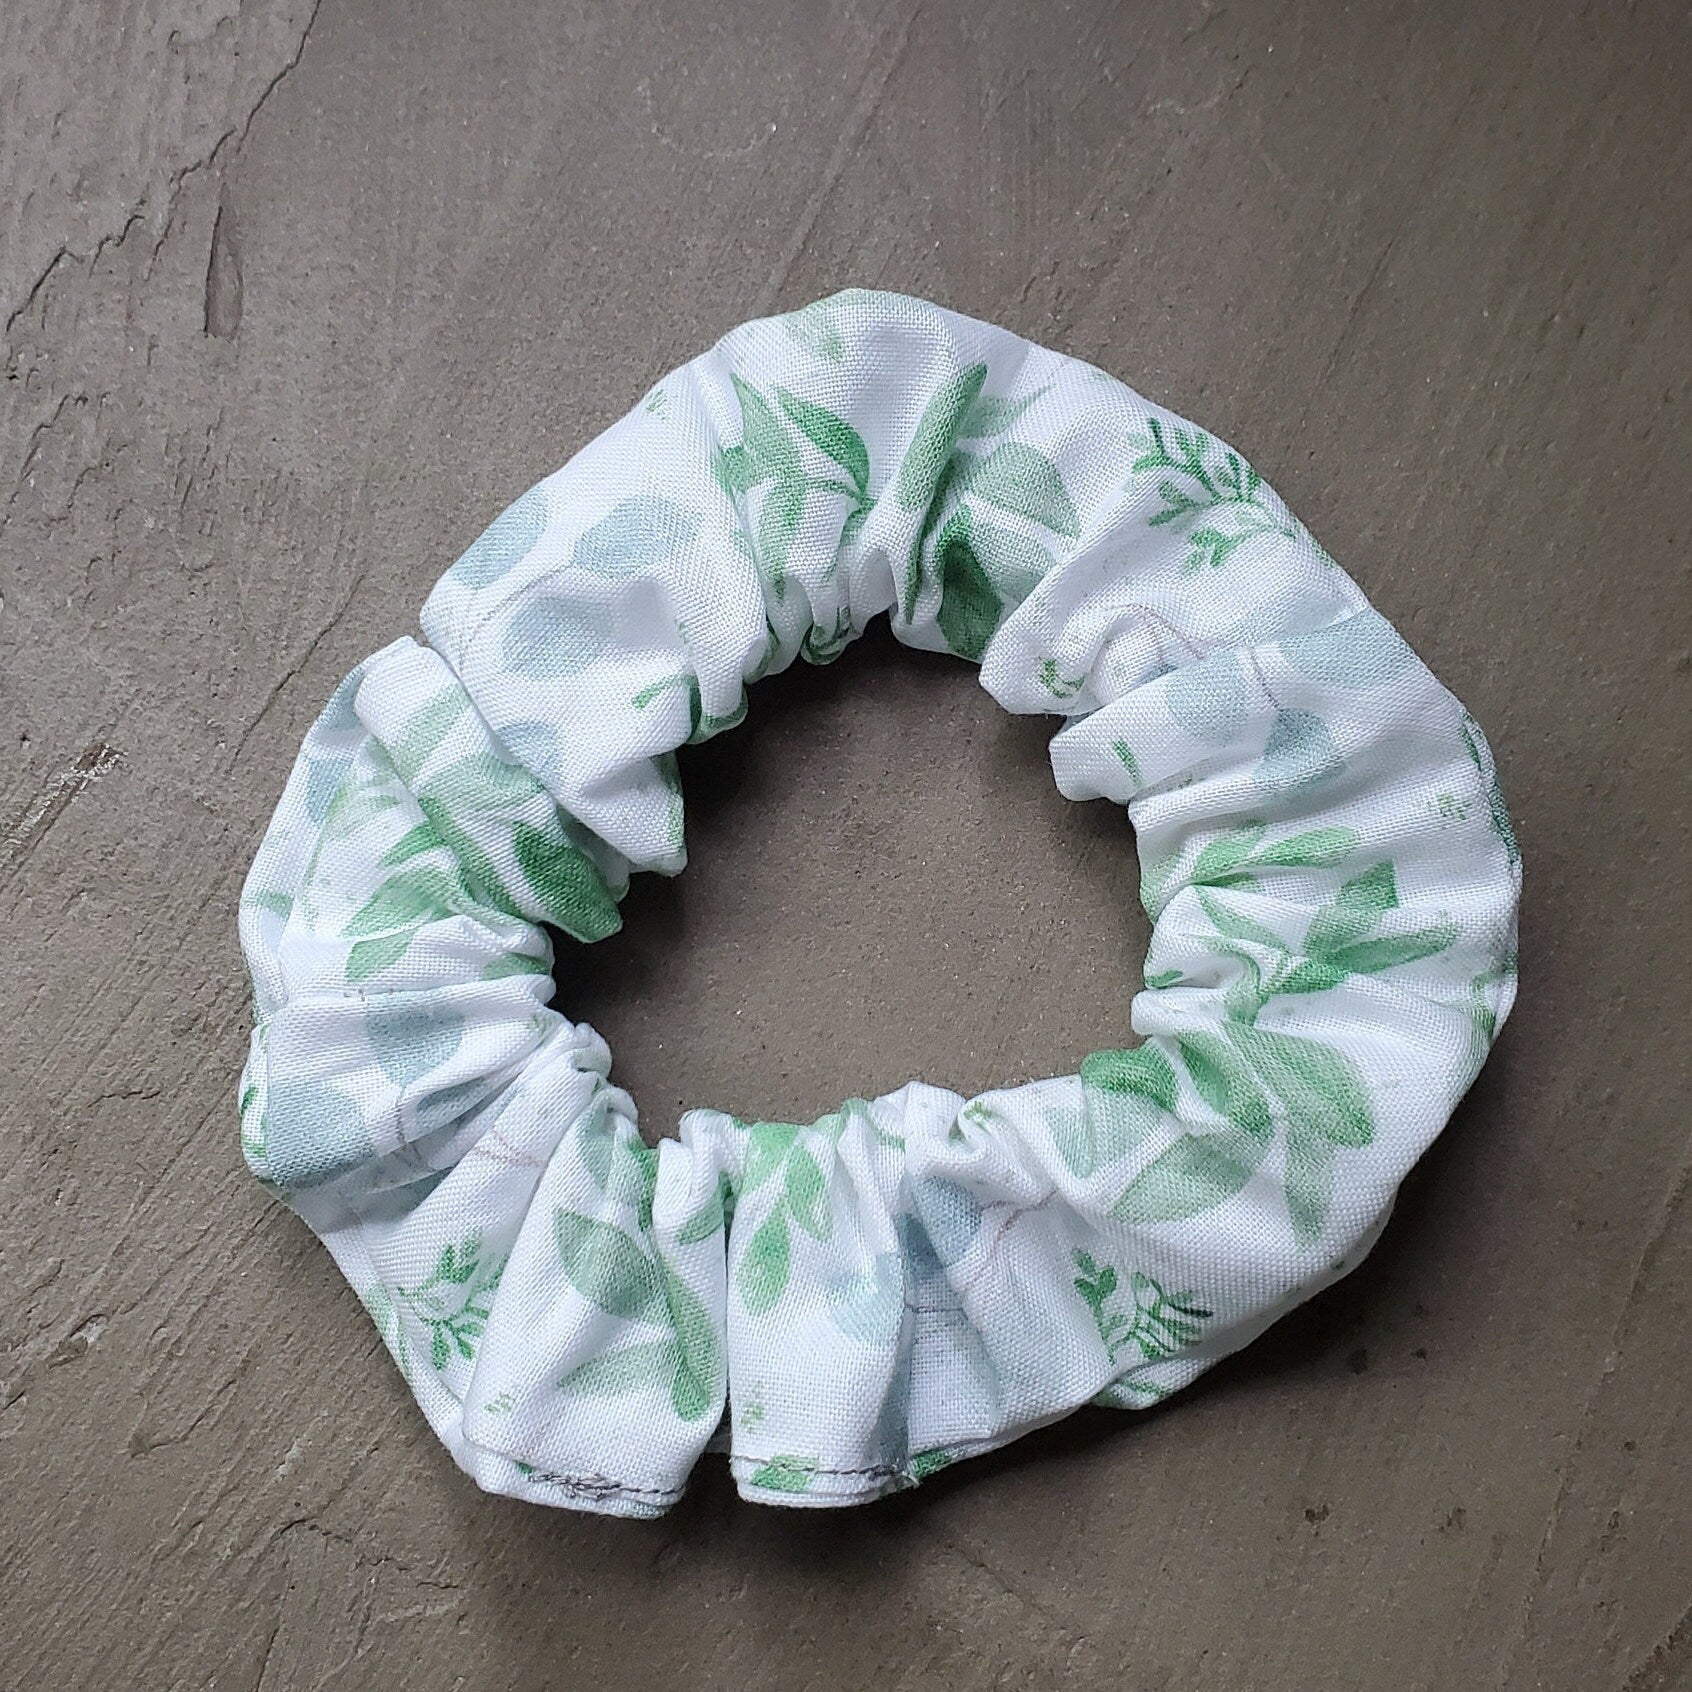 Scrunchie in natural sunlight on a concrete background.